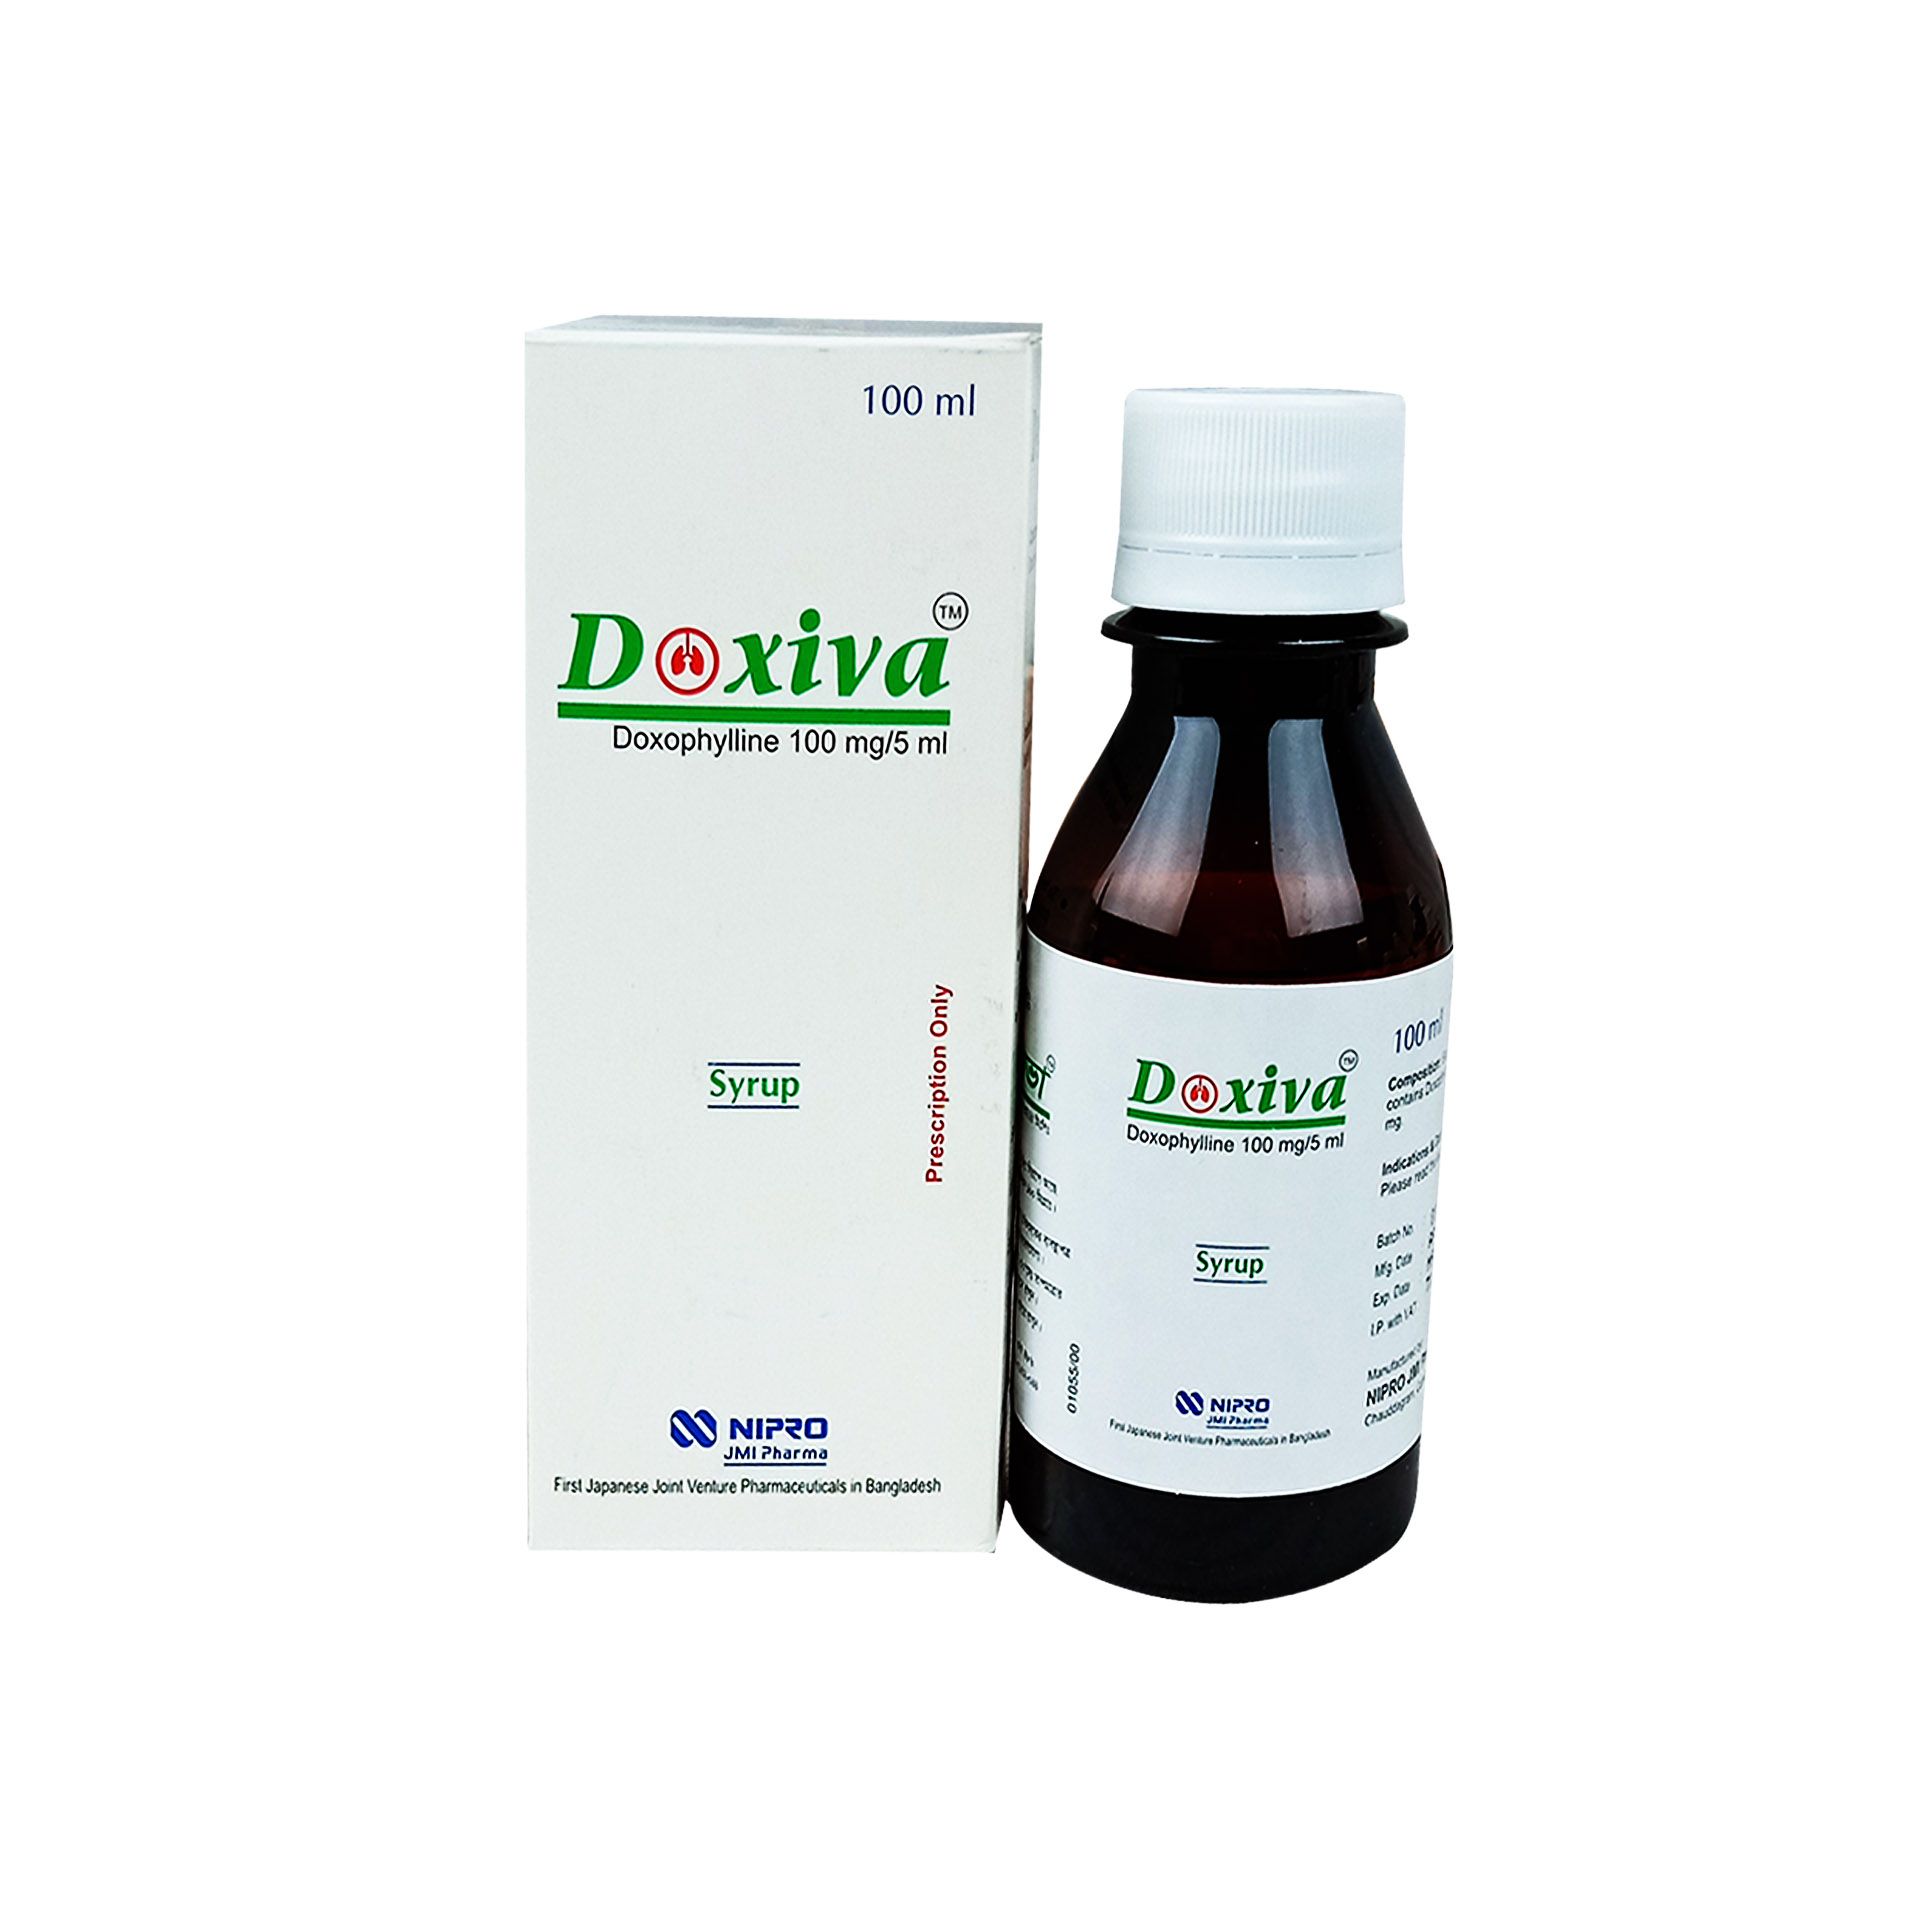 Doxiva 100mg/5ml Syrup